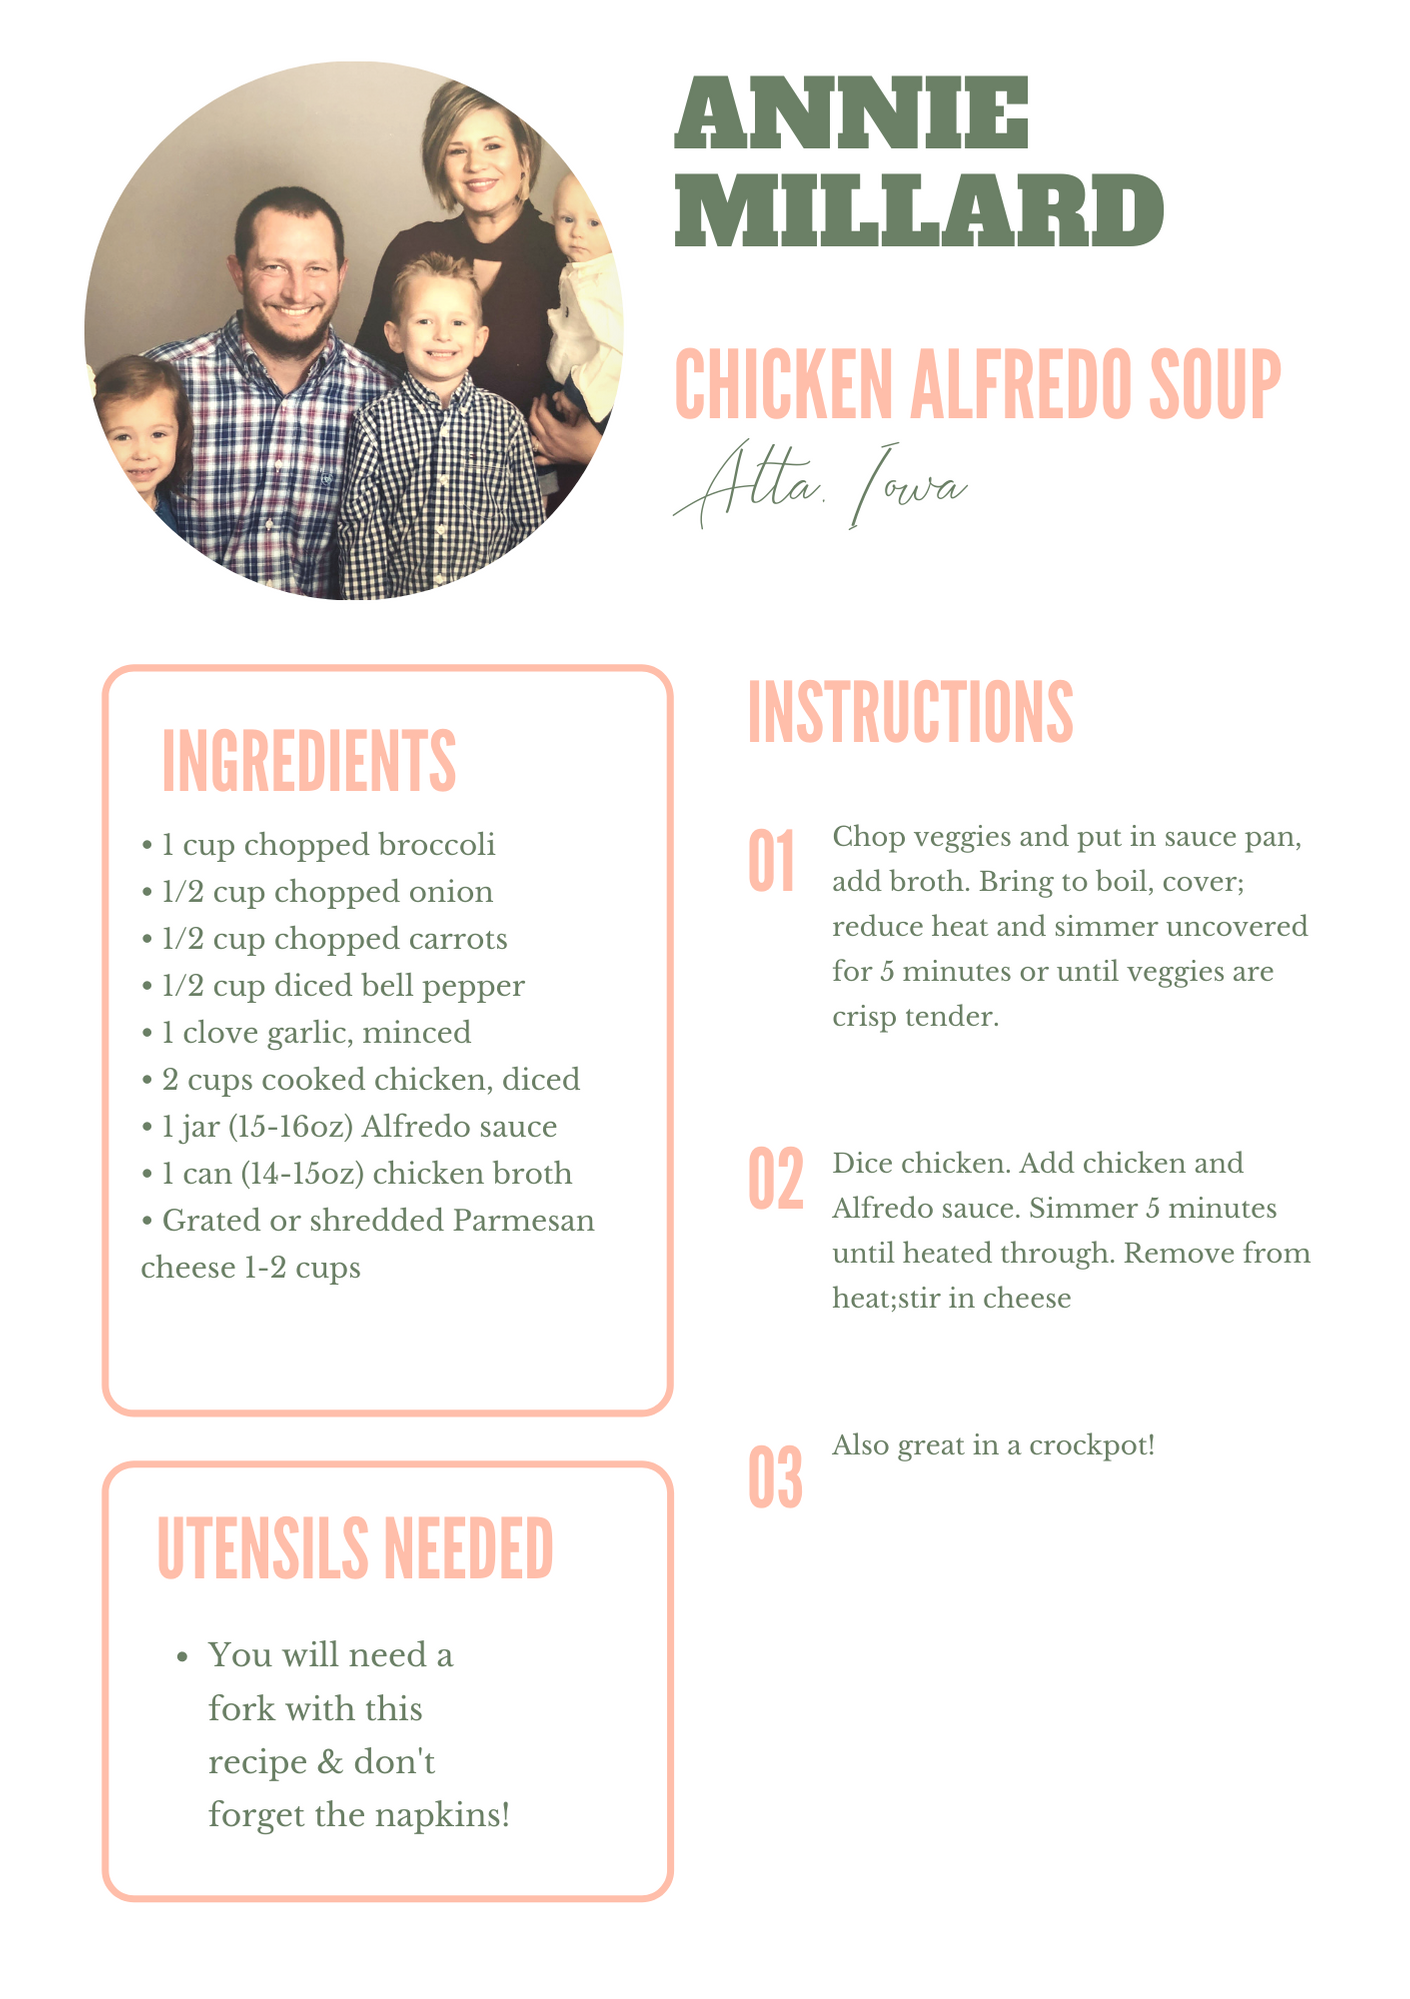 Chicken alfredo soup from the farm wife delivery cookbook